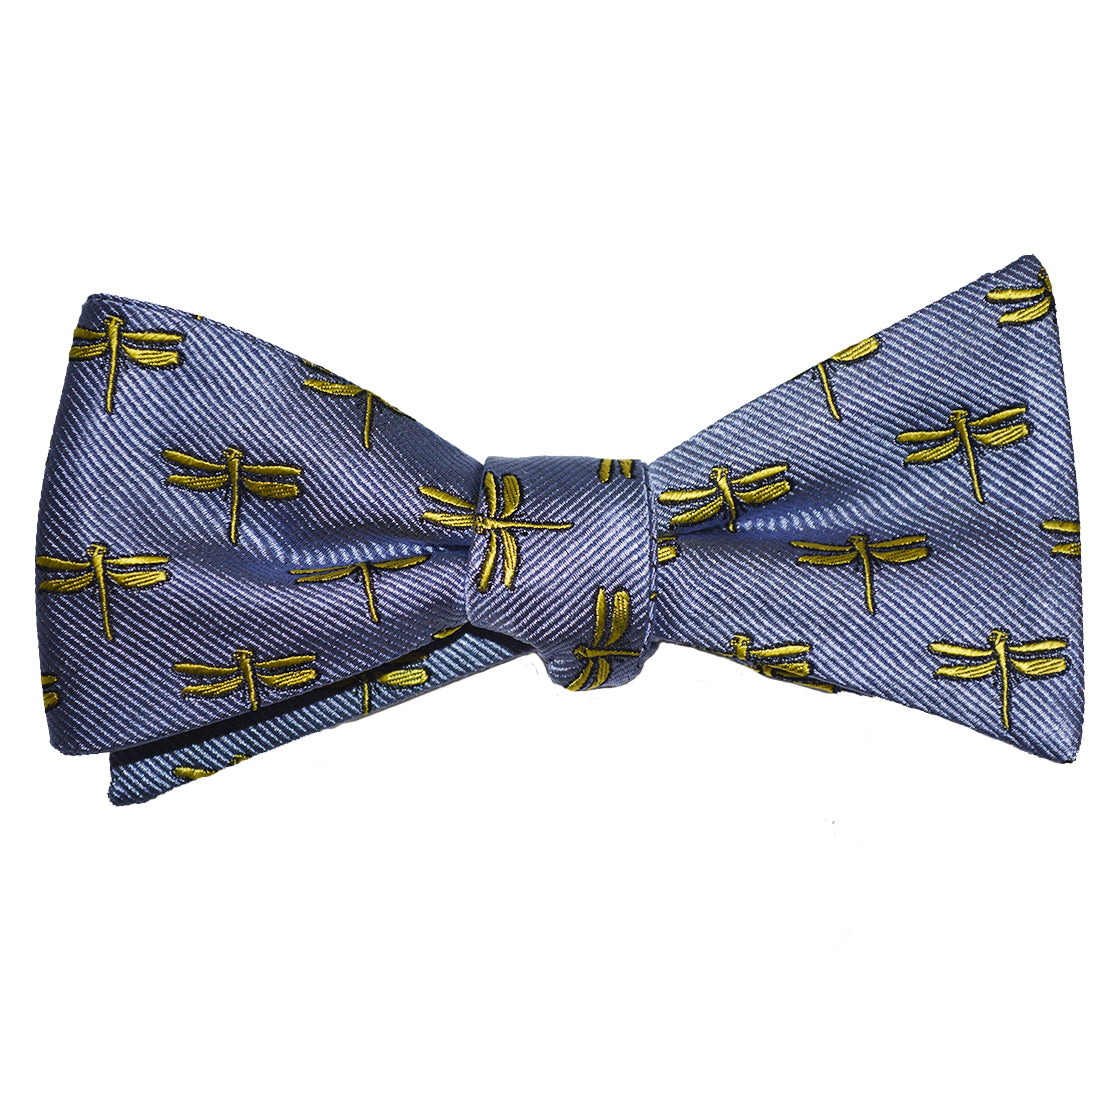 Dragonfly Bow Tie - Yellow on Gray, Woven Silk - SummerTies